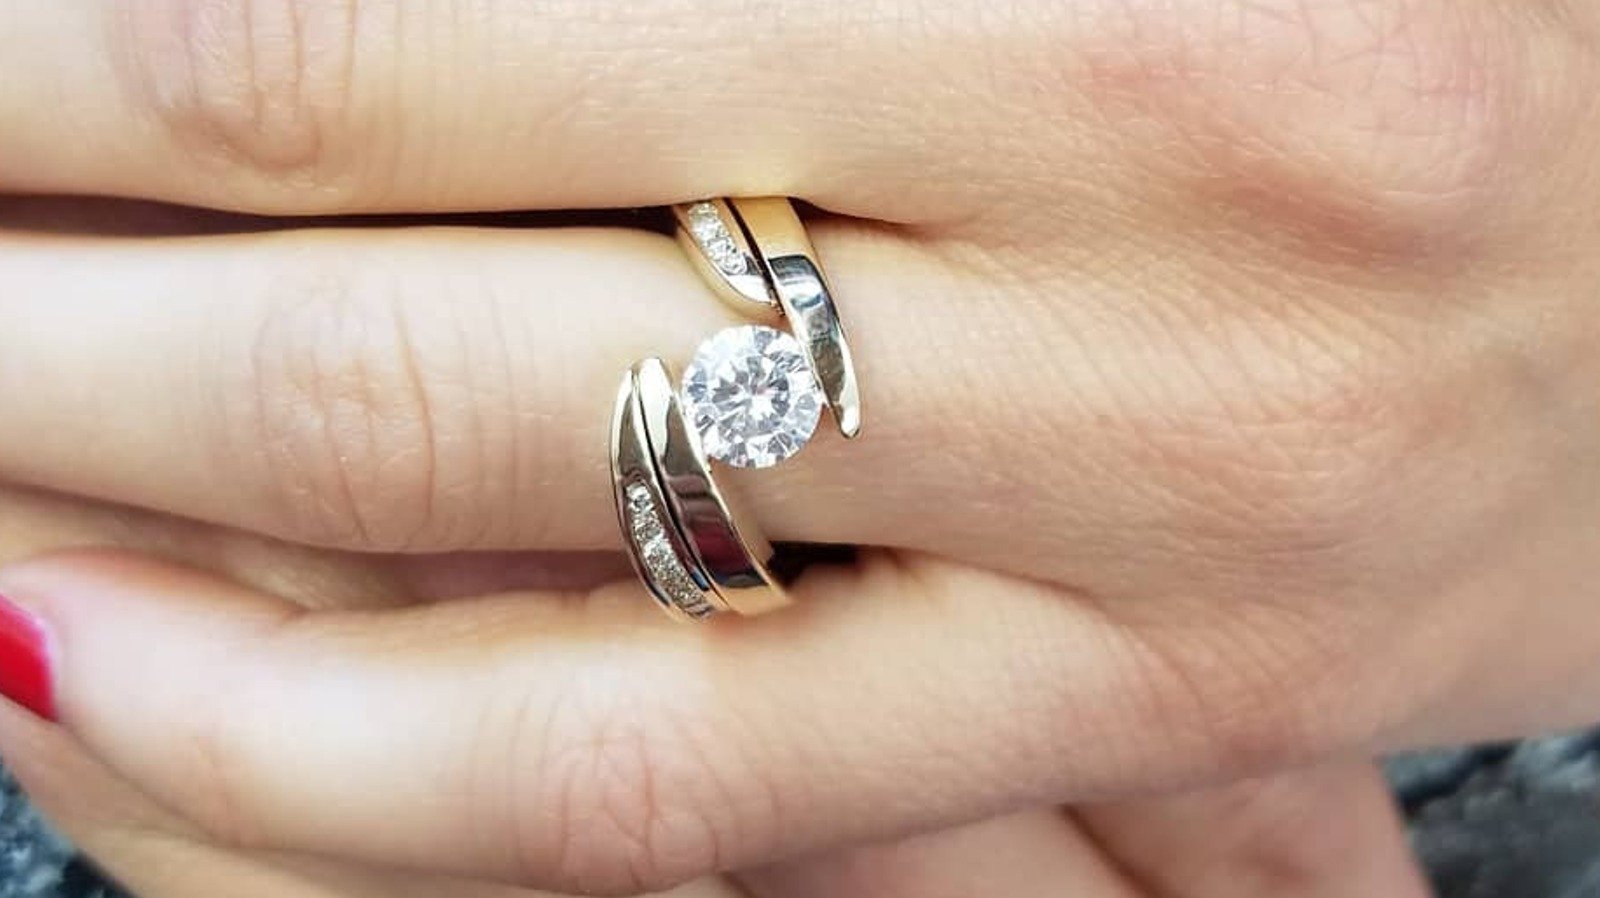 Tension Settings Are The Engagement Ring Trend You Should Avoid At All Costs - Here's Why